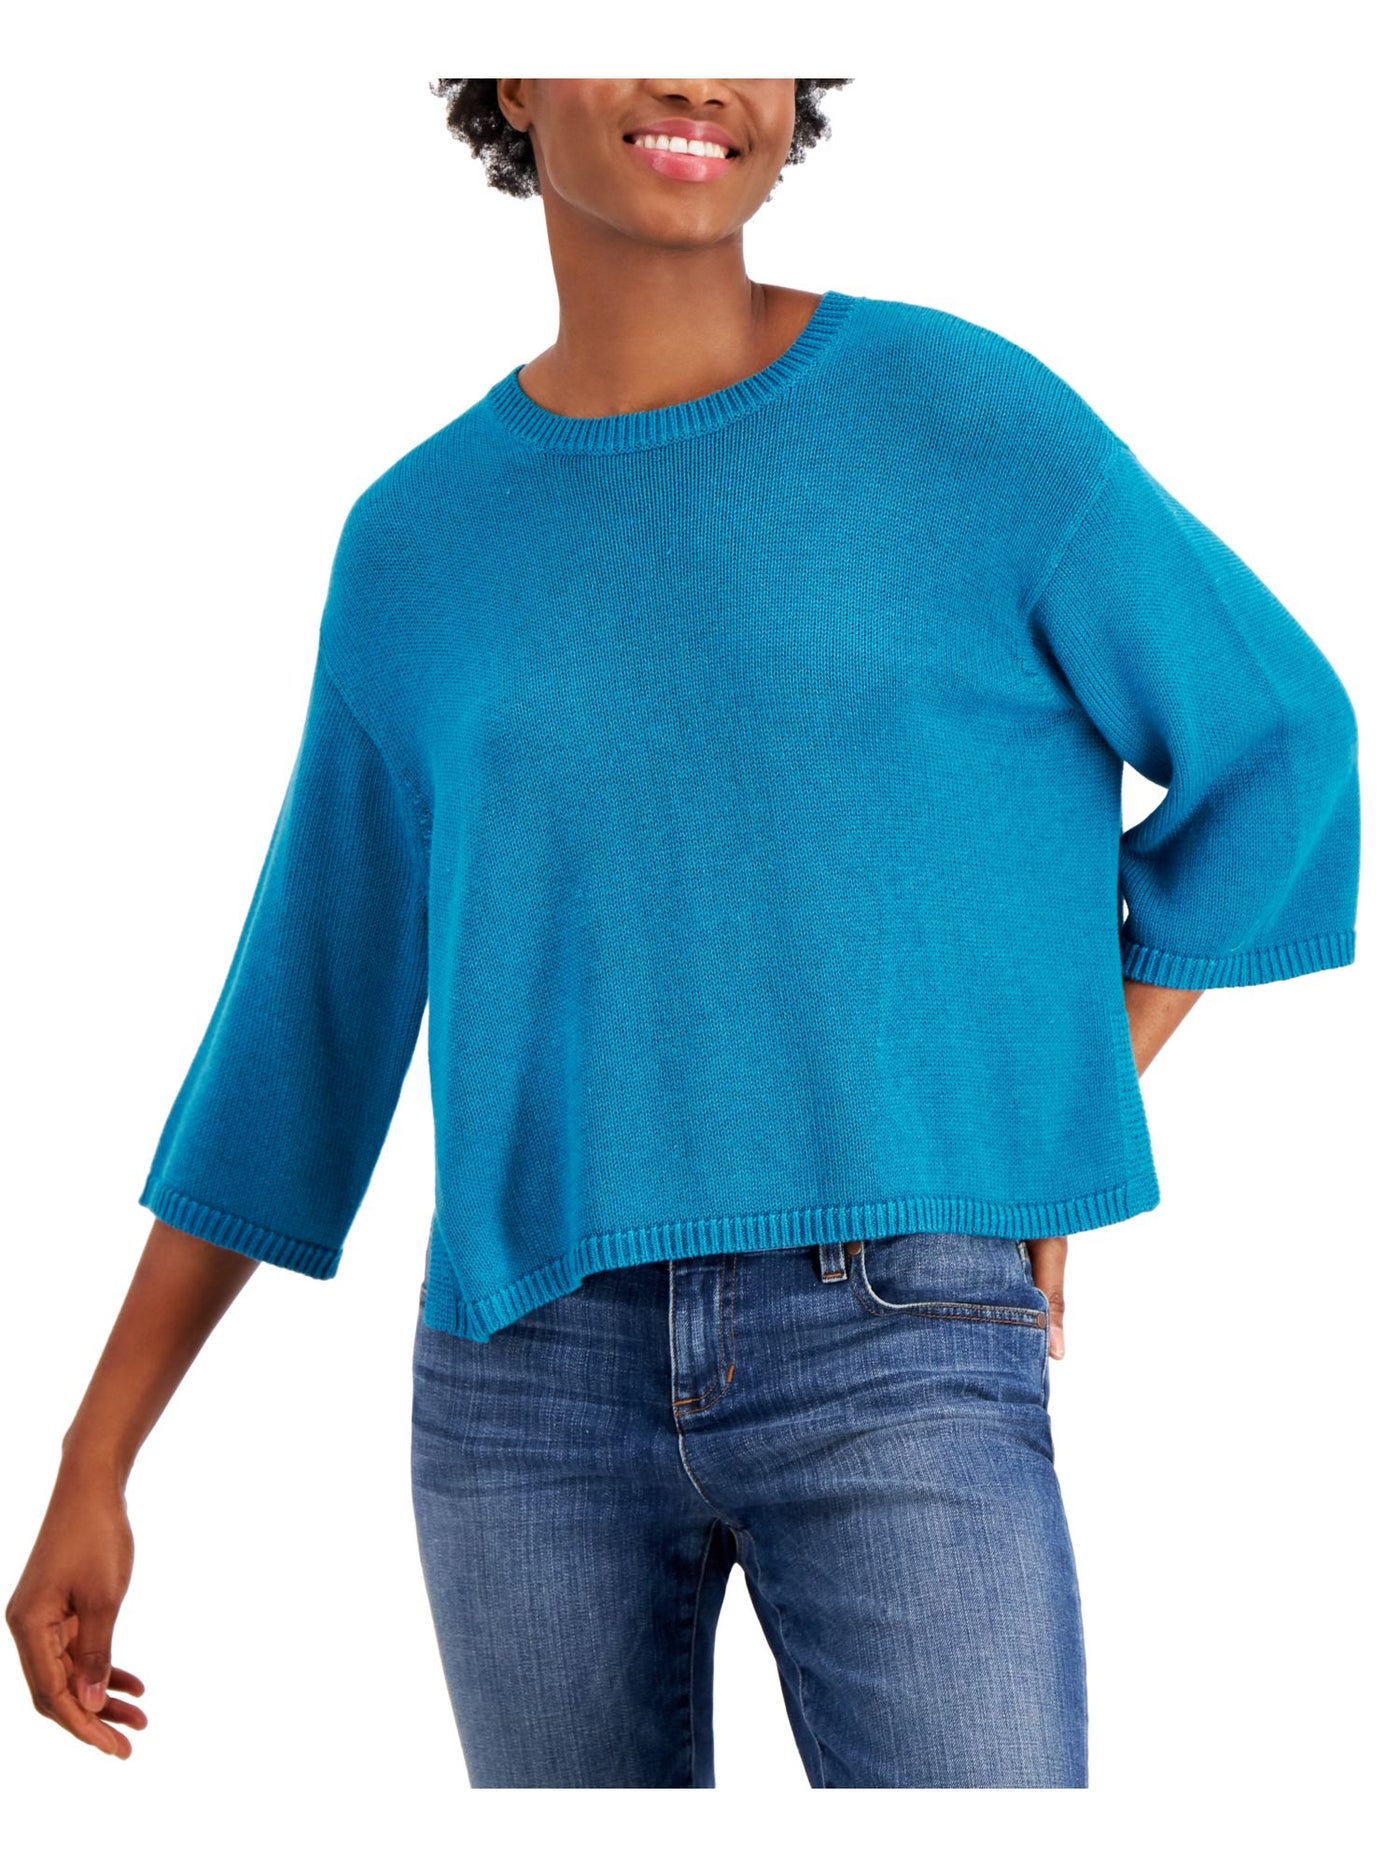 EILEEN FISHER Womens Turquoise Crew Neck Top XL